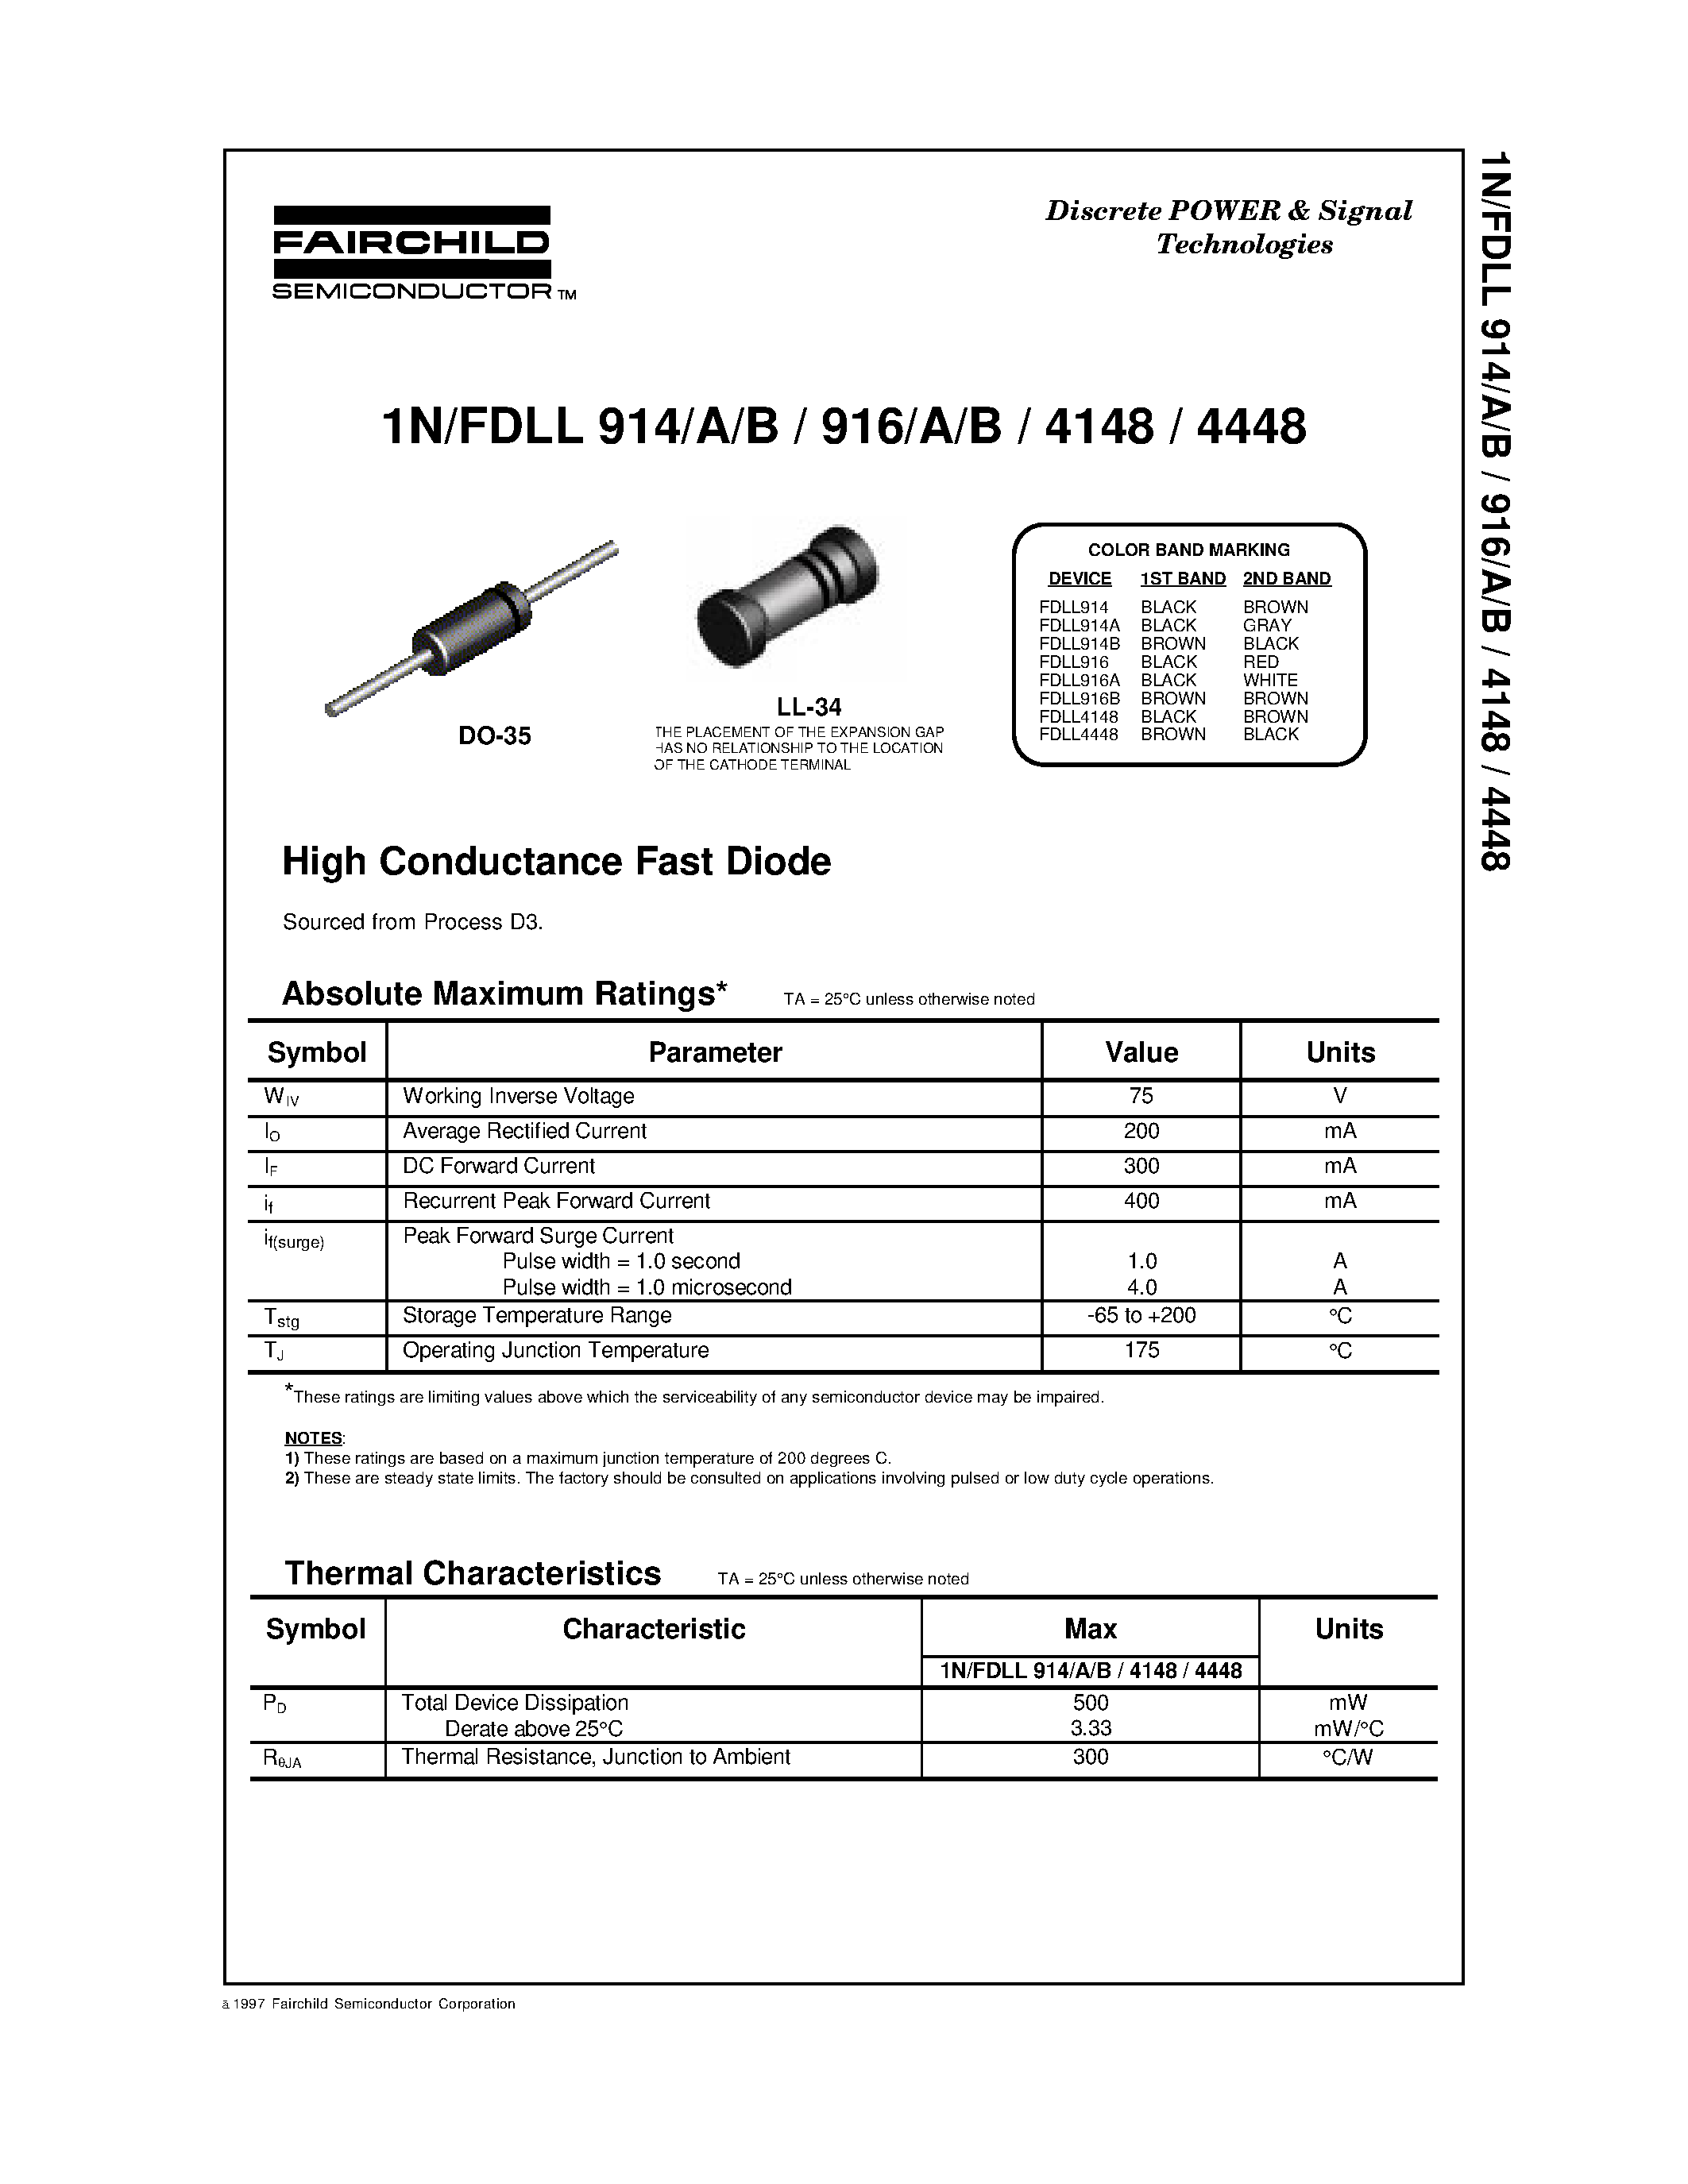 Datasheet FDLL4148 - High Conductance Fast Diode page 1